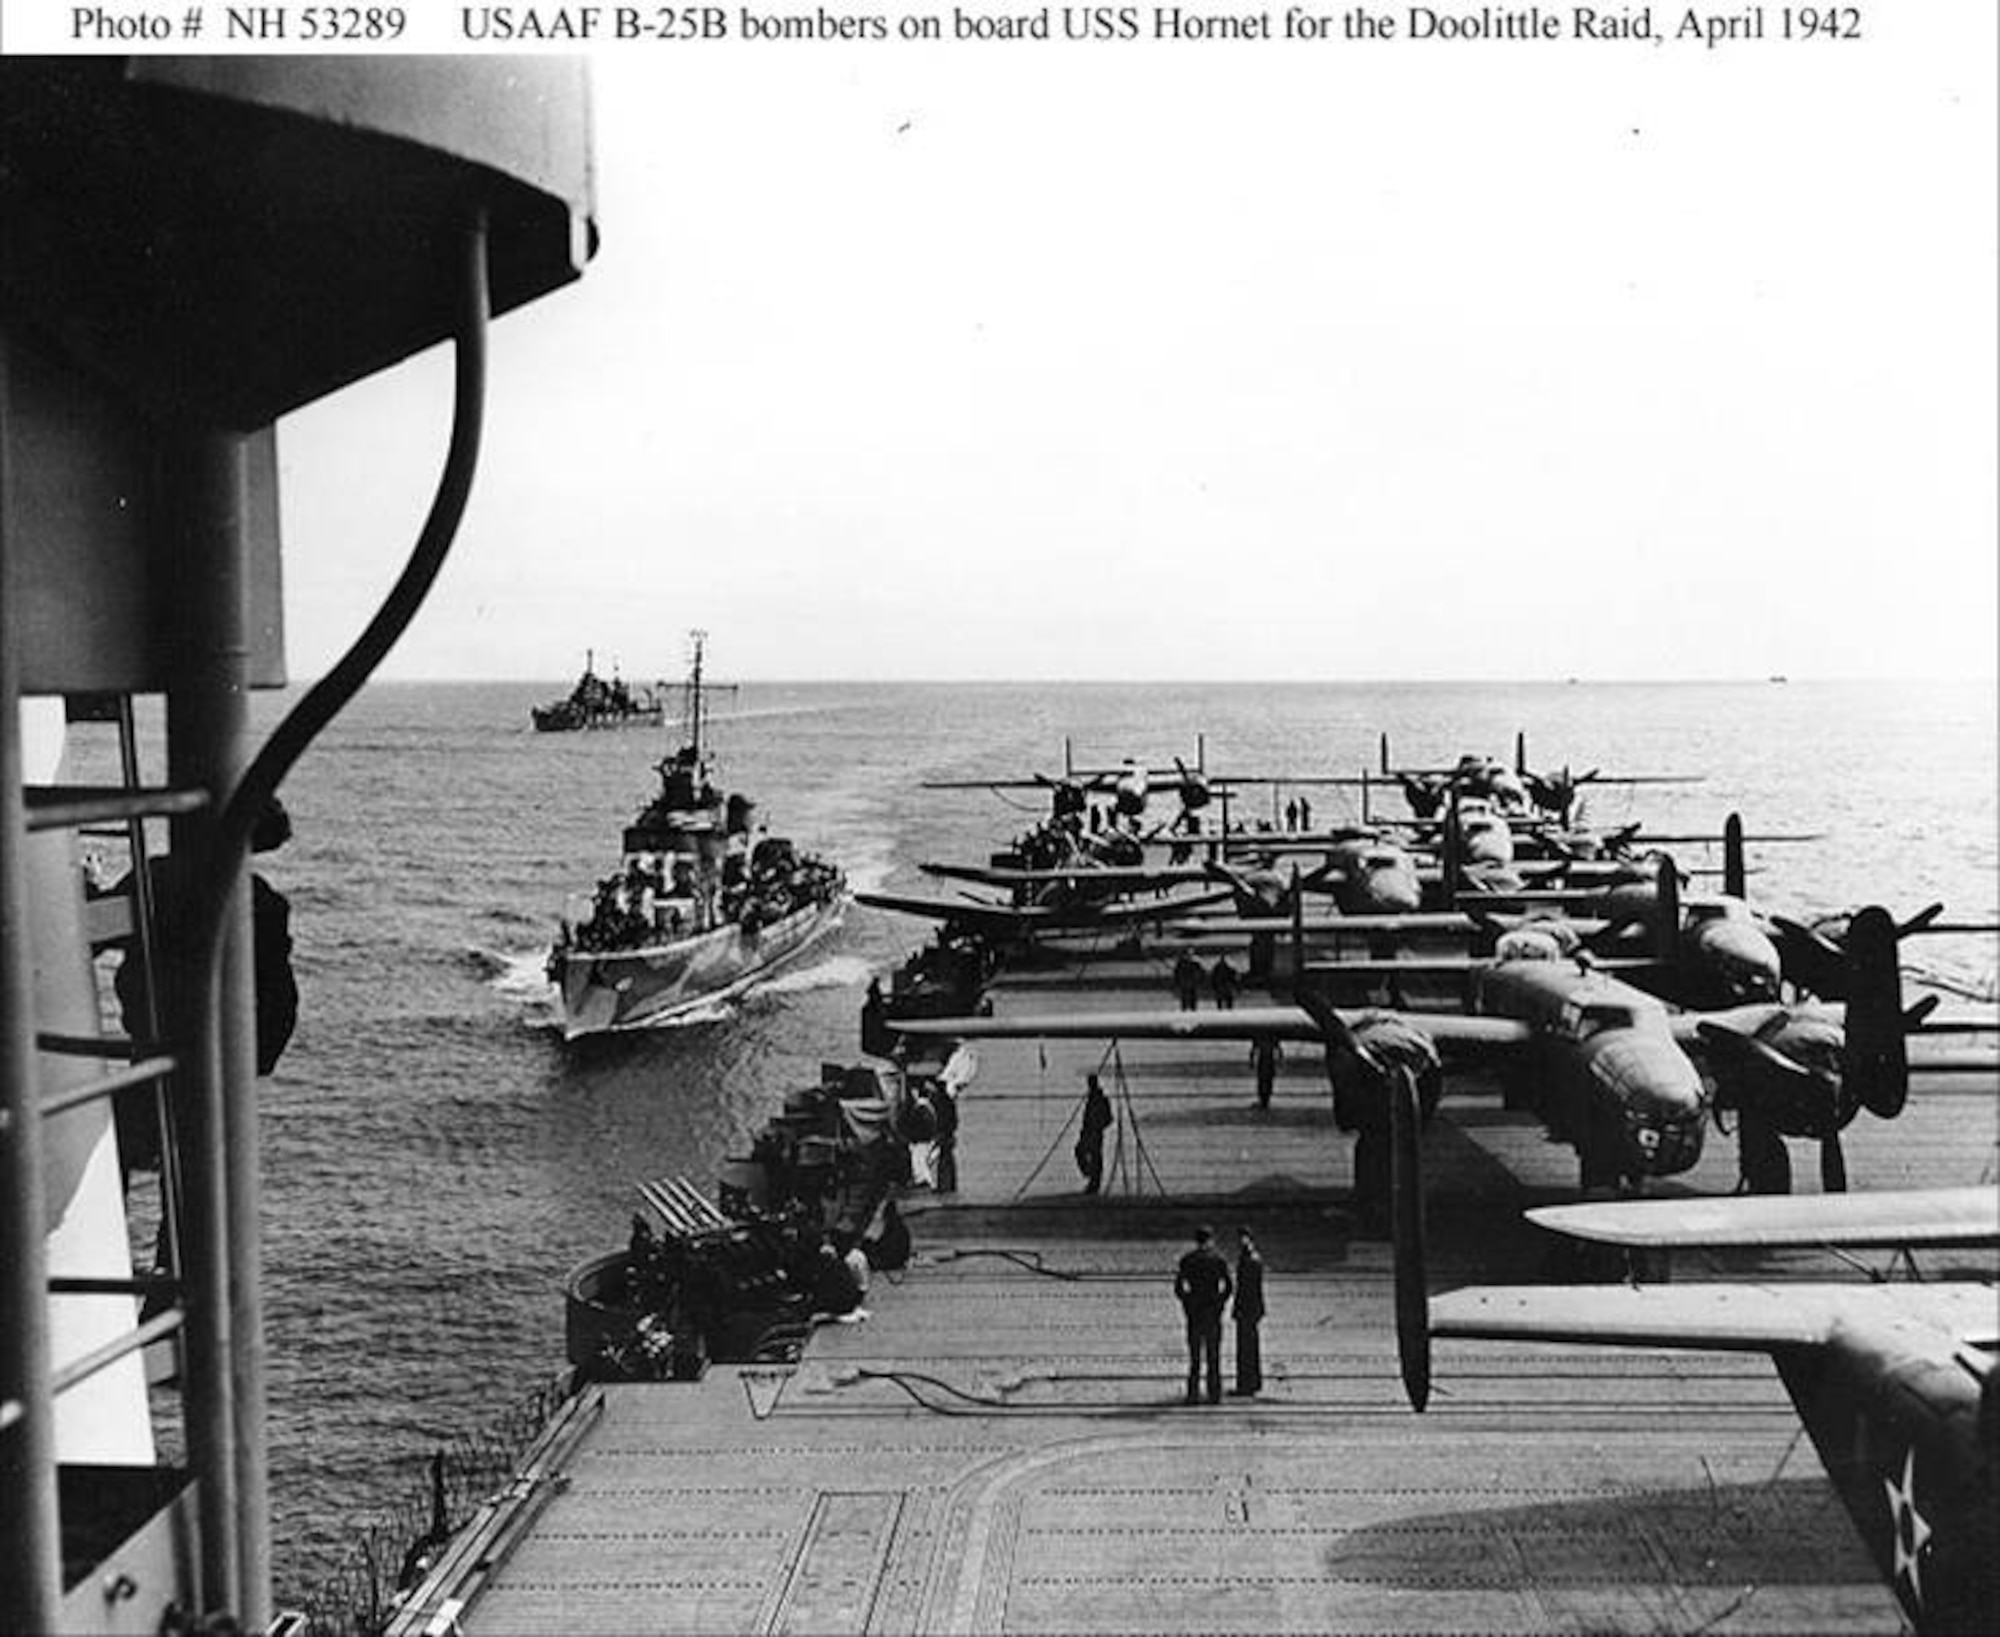 B-25s on deck of the USS Hornet during transport to launch point; Doolittle Tokyo Raid, April 1942.